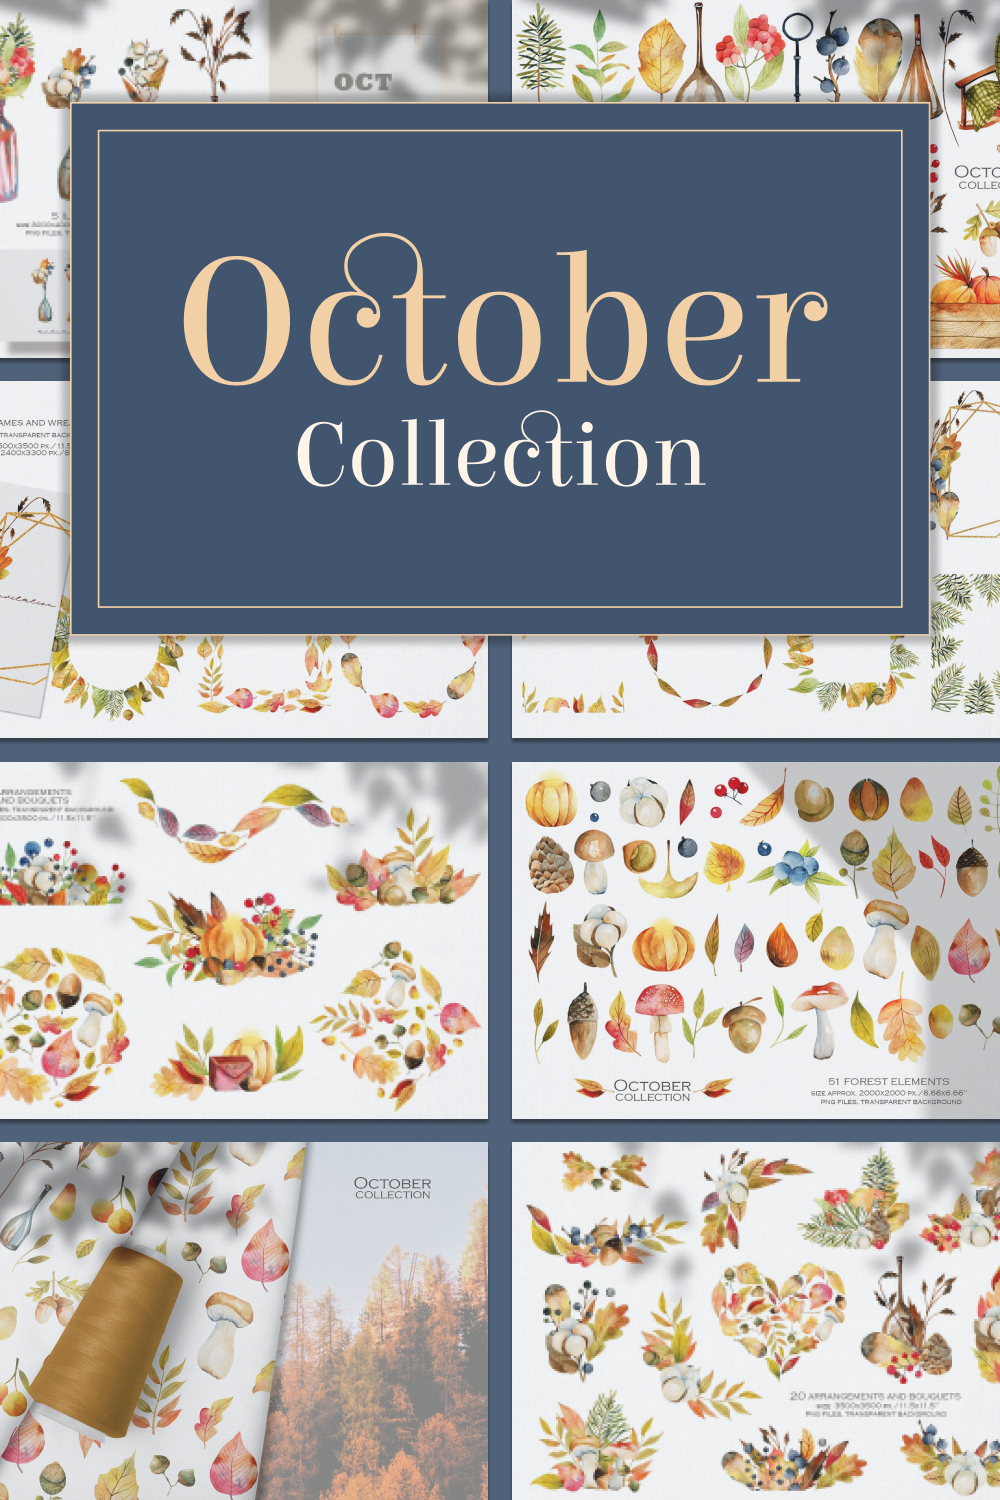 October collection of pinterest.